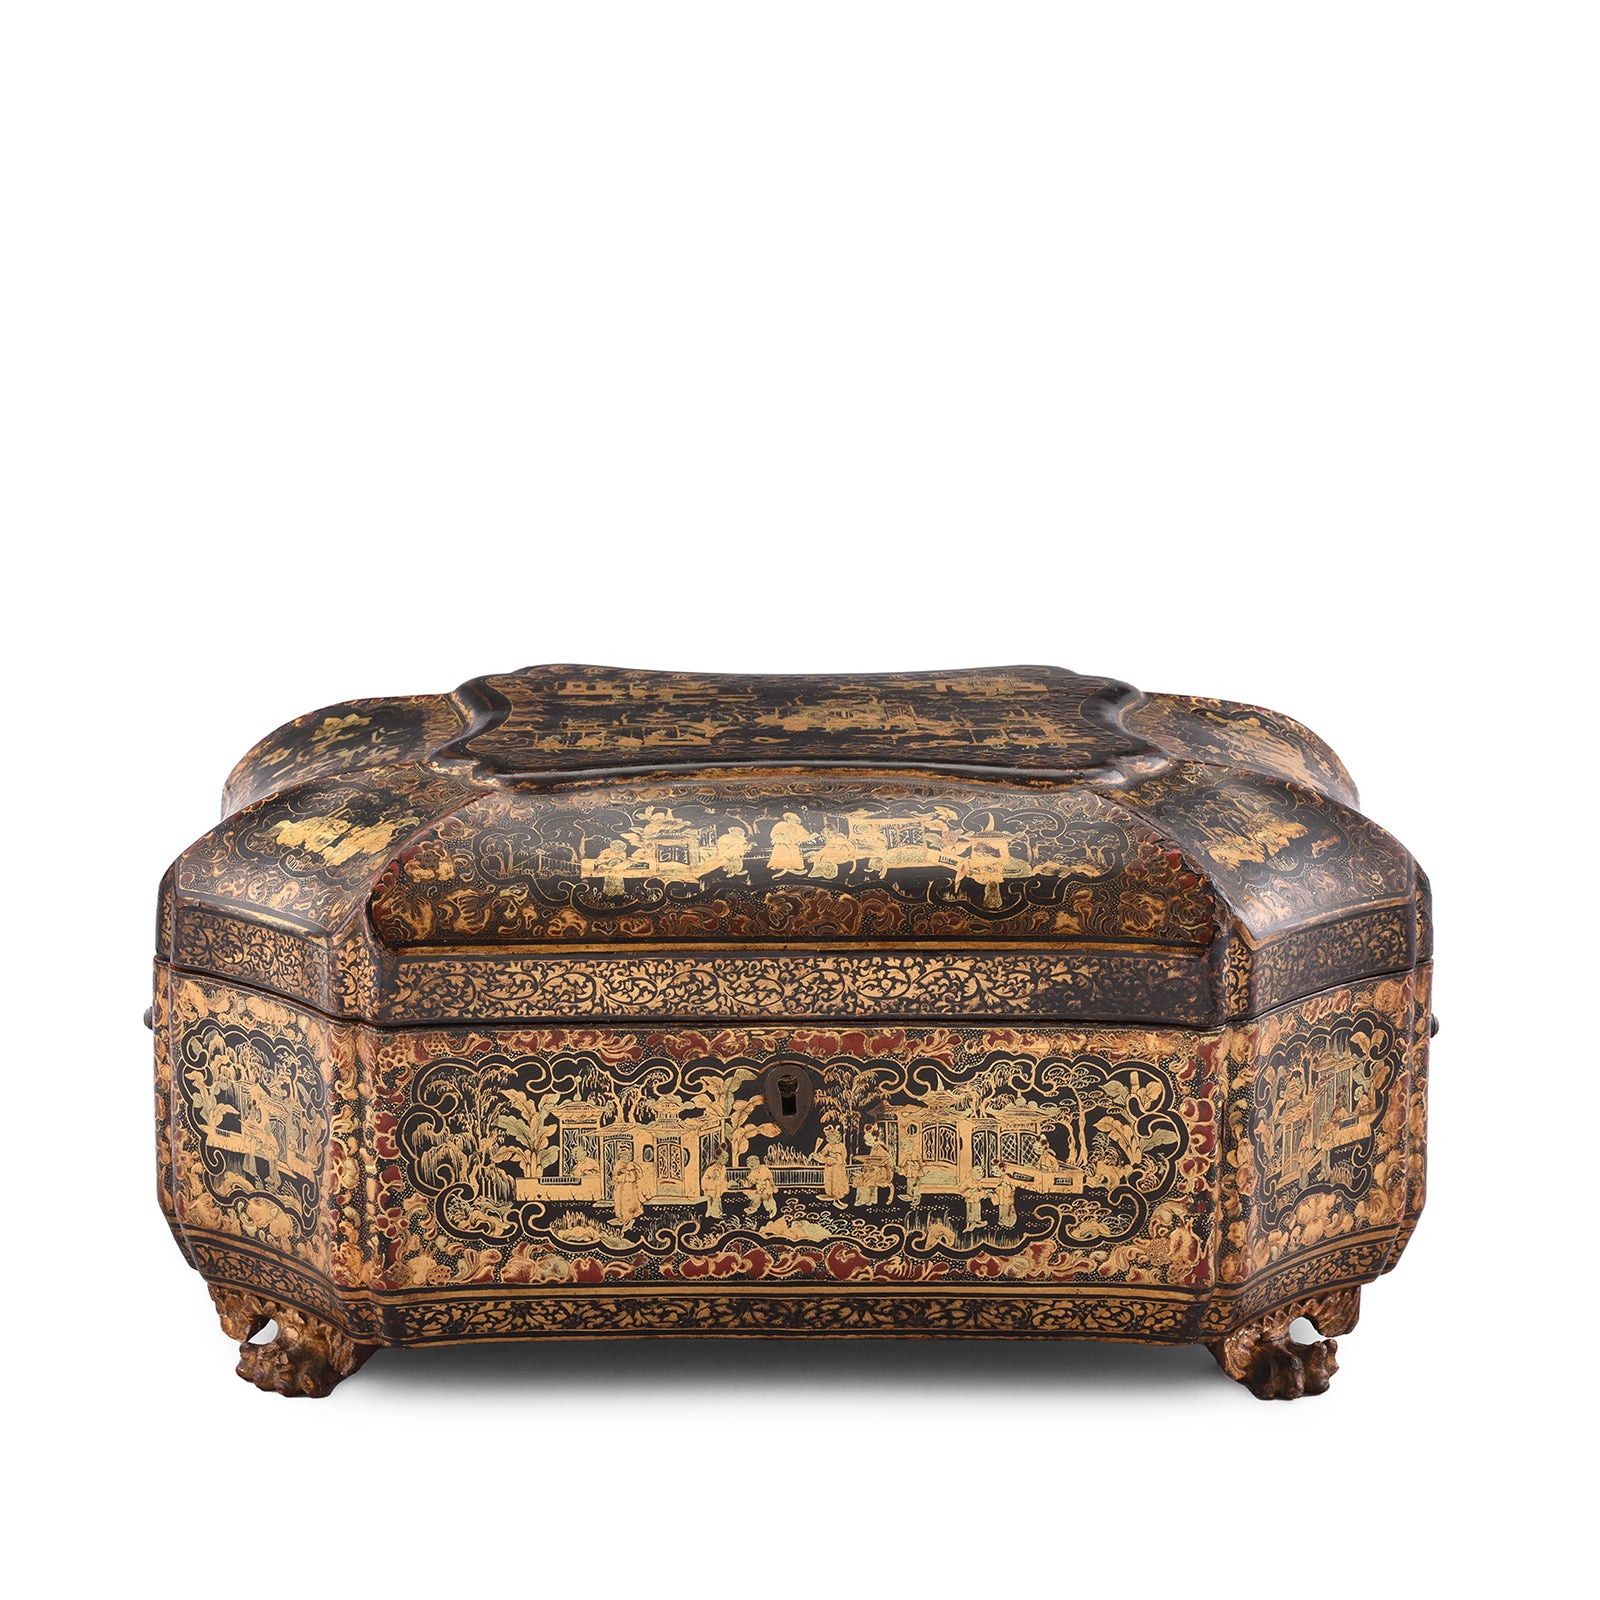 Antique Black Lacquer Chinoiserie Sewing Box | Indigo Antiques 